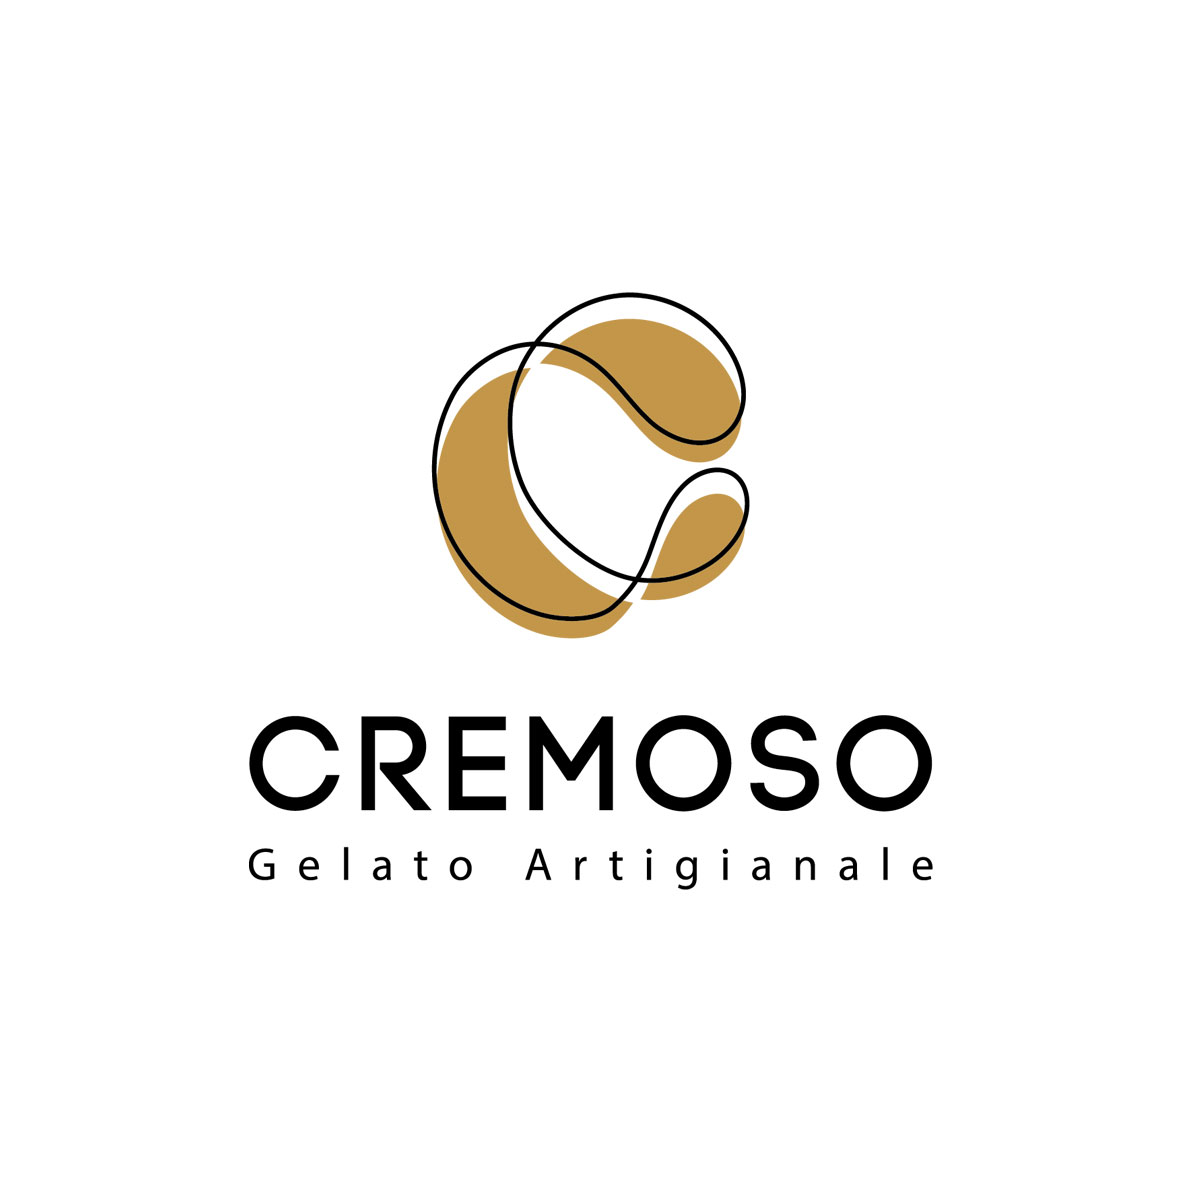 15% discount on all deserts and beverages at all Cremoso's stores. The discount is valid only for dine-in, Monday - Sunday.

Note: Terms and conditions apply.